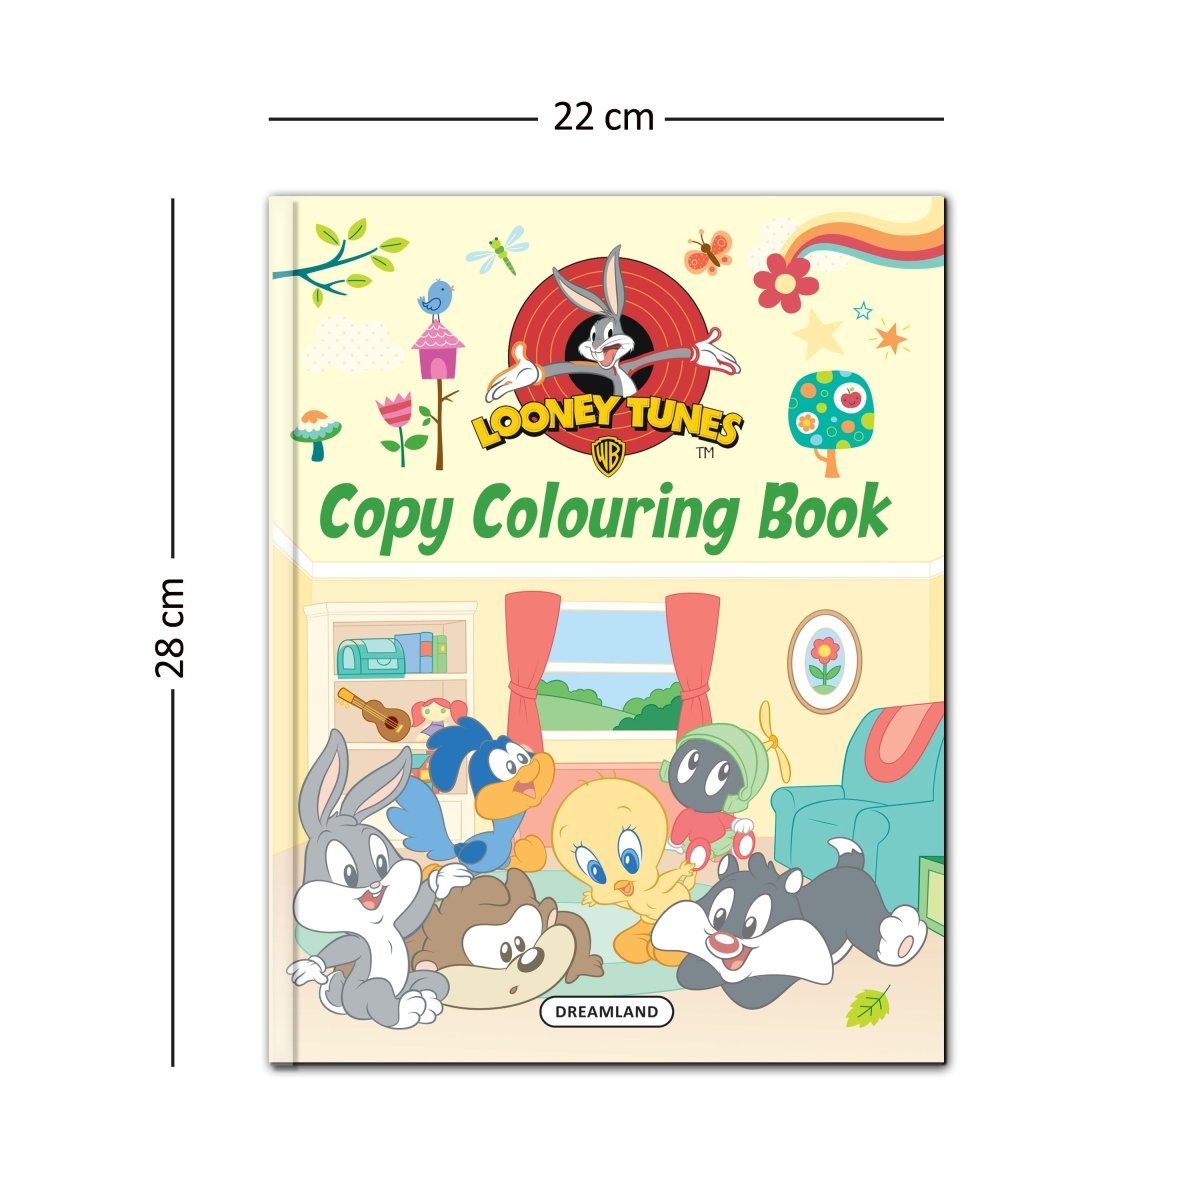 Dreamland Publications Looney Tunes Copy Colouring Books Pack ( Pack of 2 ) - 9789394767874